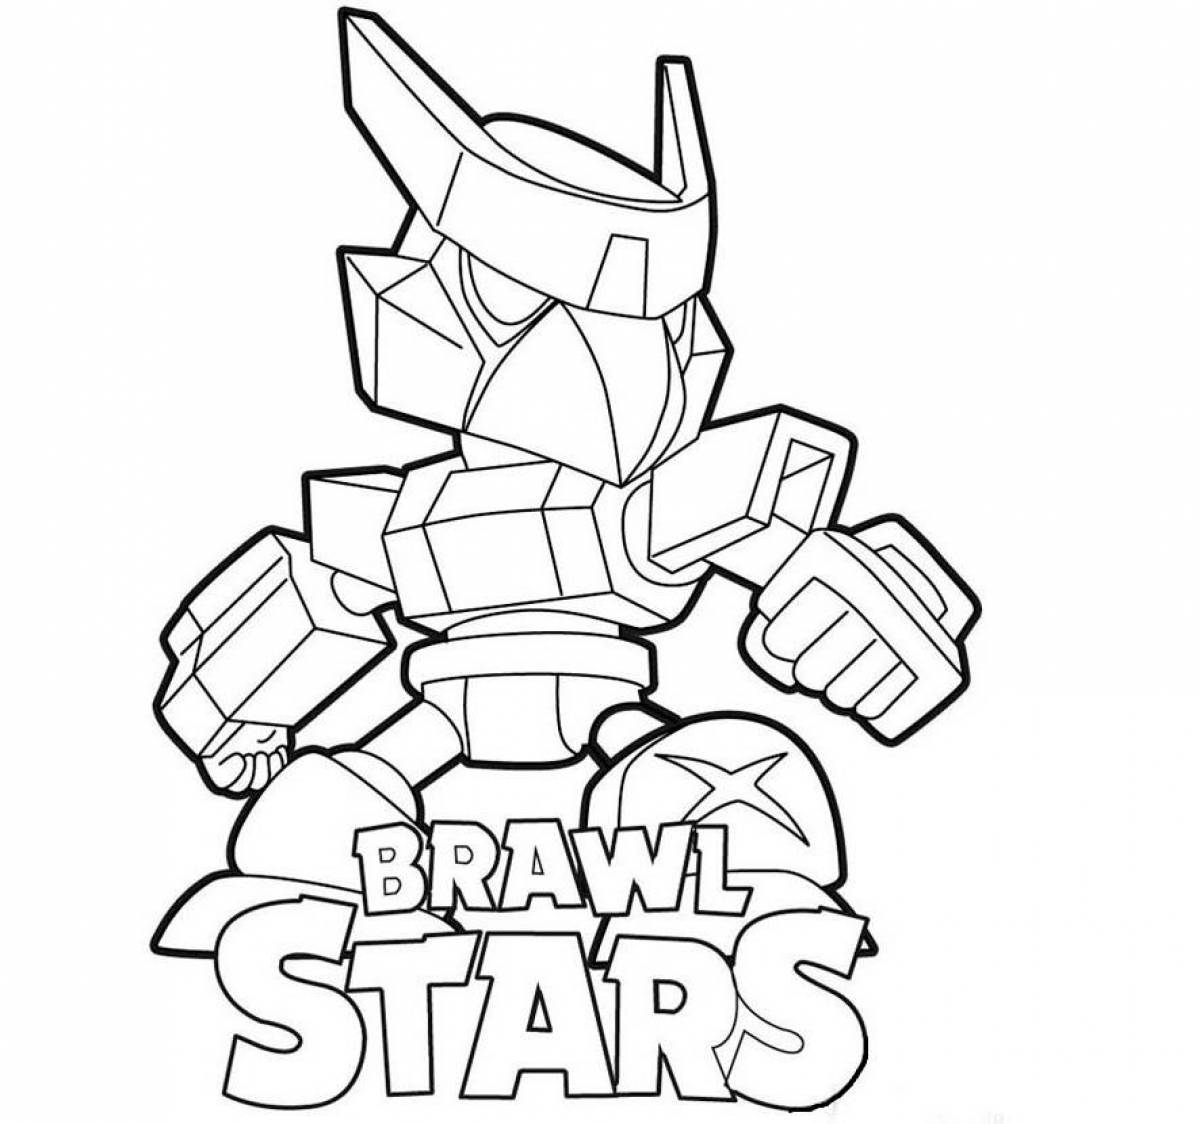 Colorful raven bravo stars coloring page